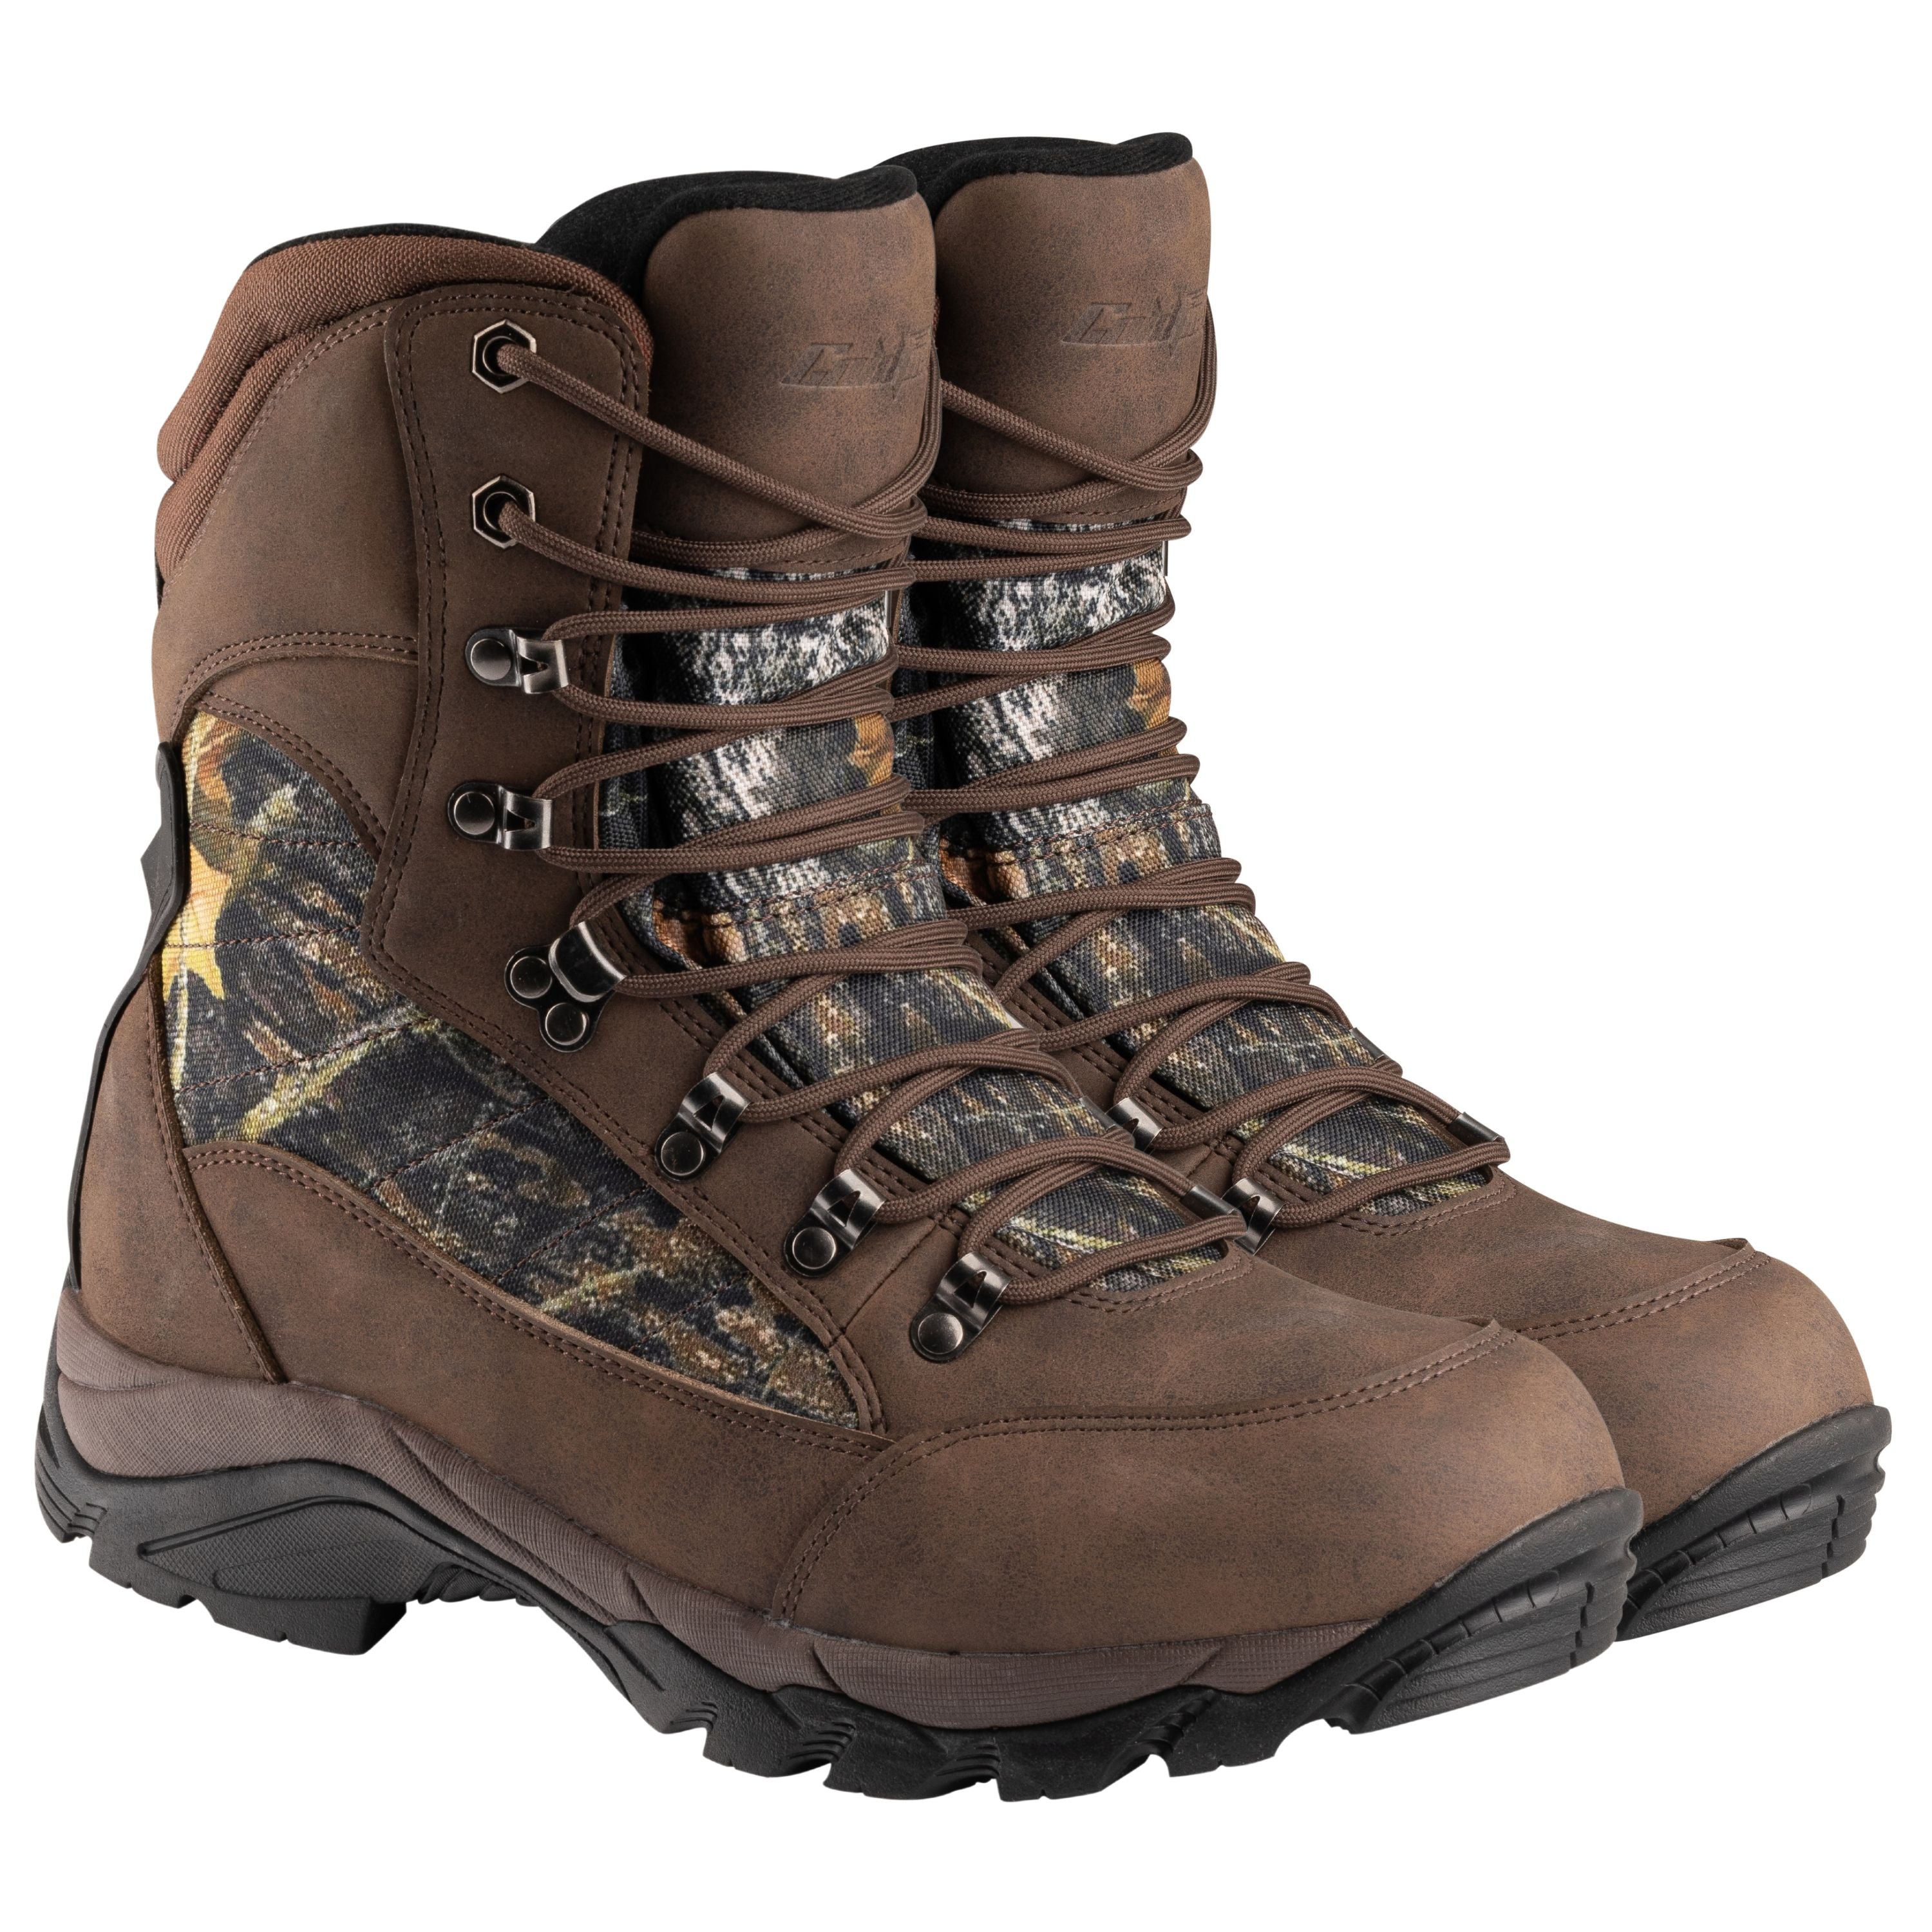 Summit Thinsulate boots - Men’s